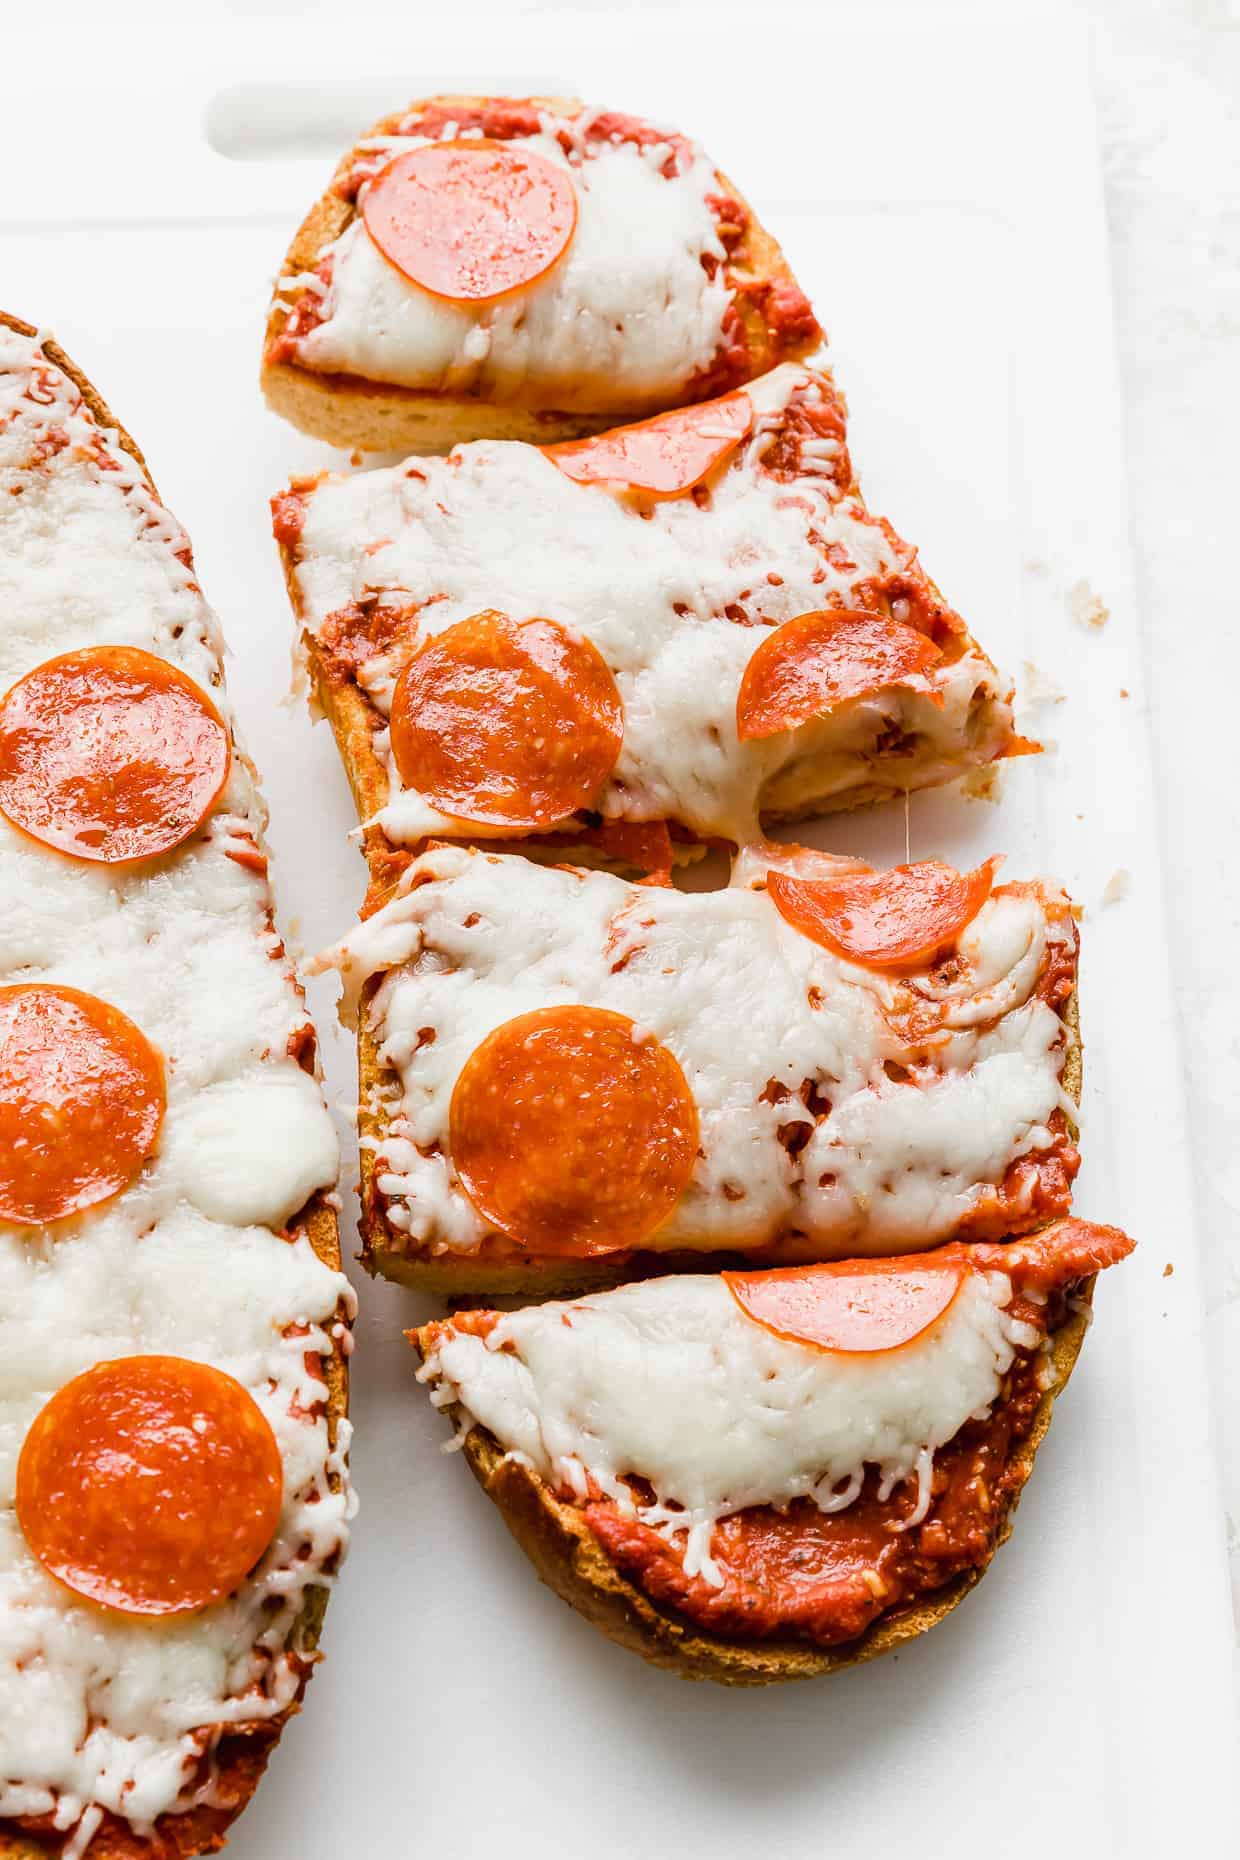  A pepperoni French bread pizza on a white background.